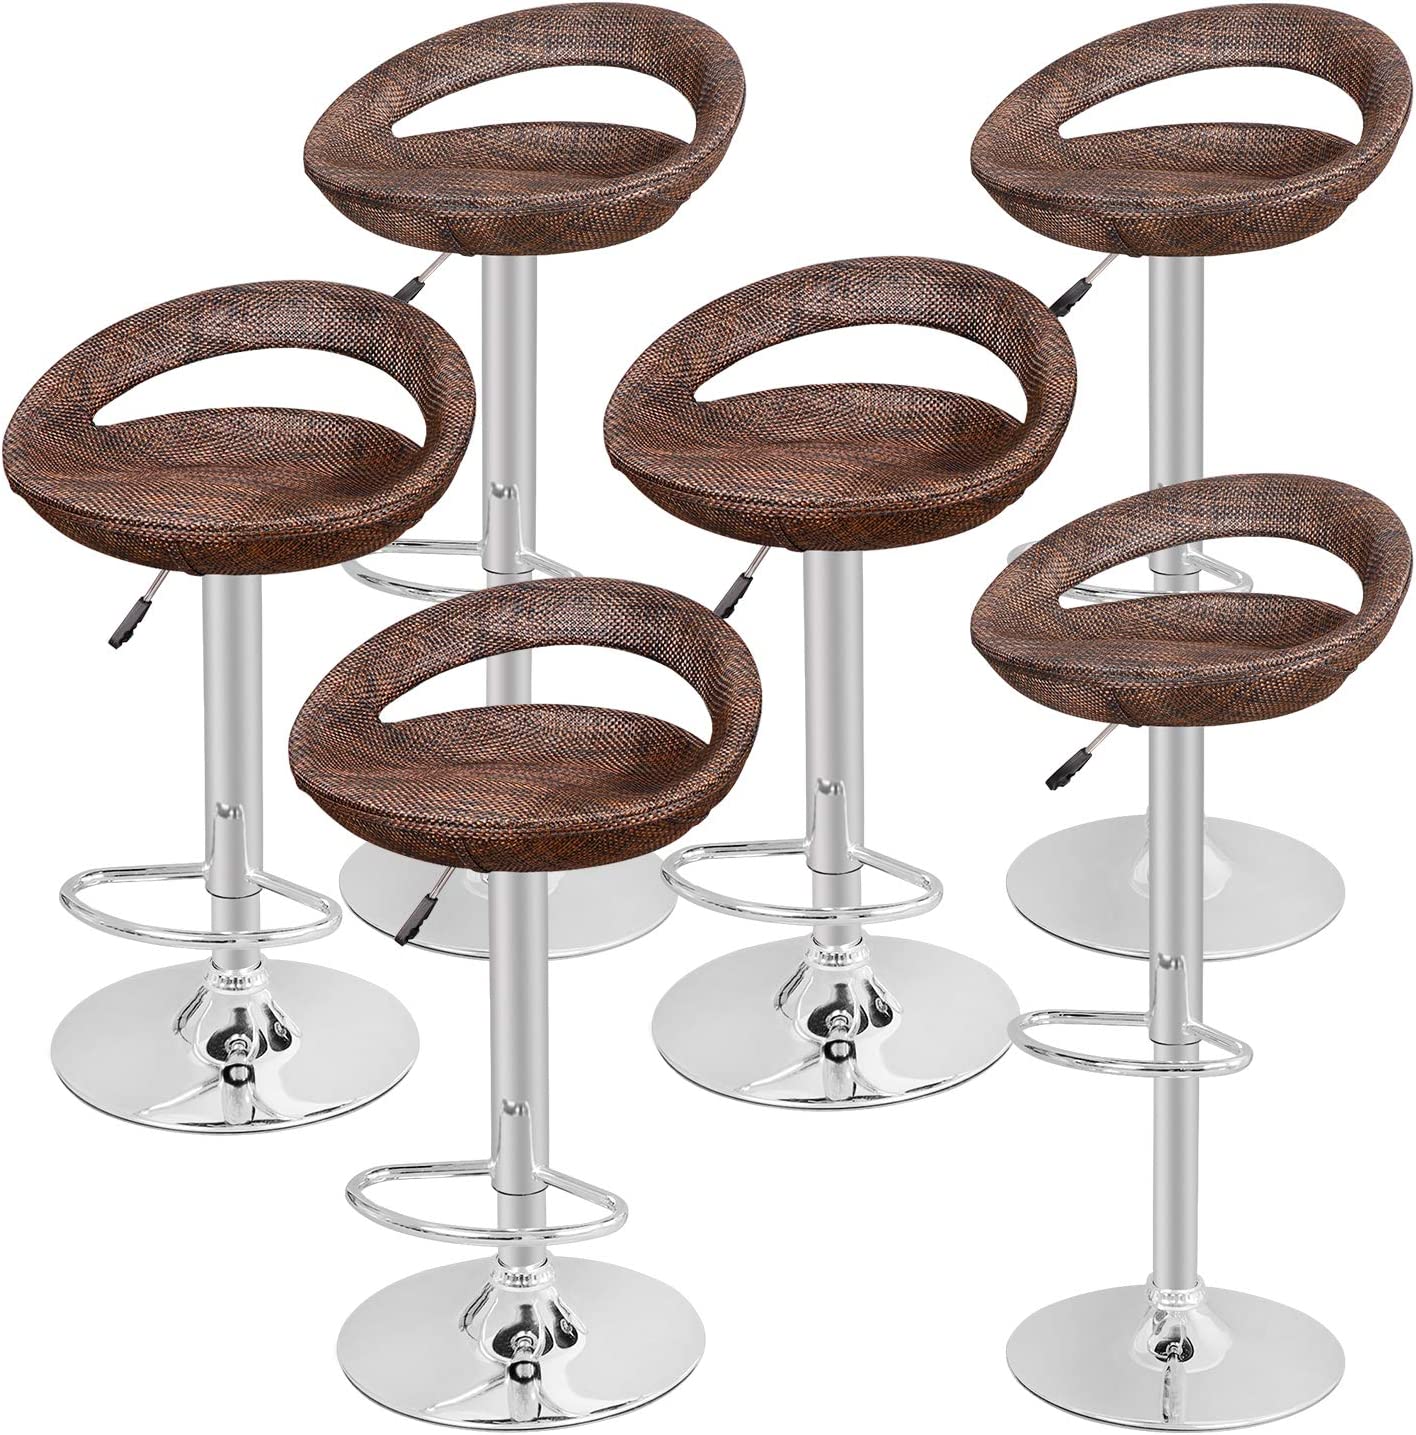 Set of 6 Adjustable Bar Stools, Pub Swivel Barstool Chairs with Back, Pub Kitchen Counter Height Modern Patio Barstool